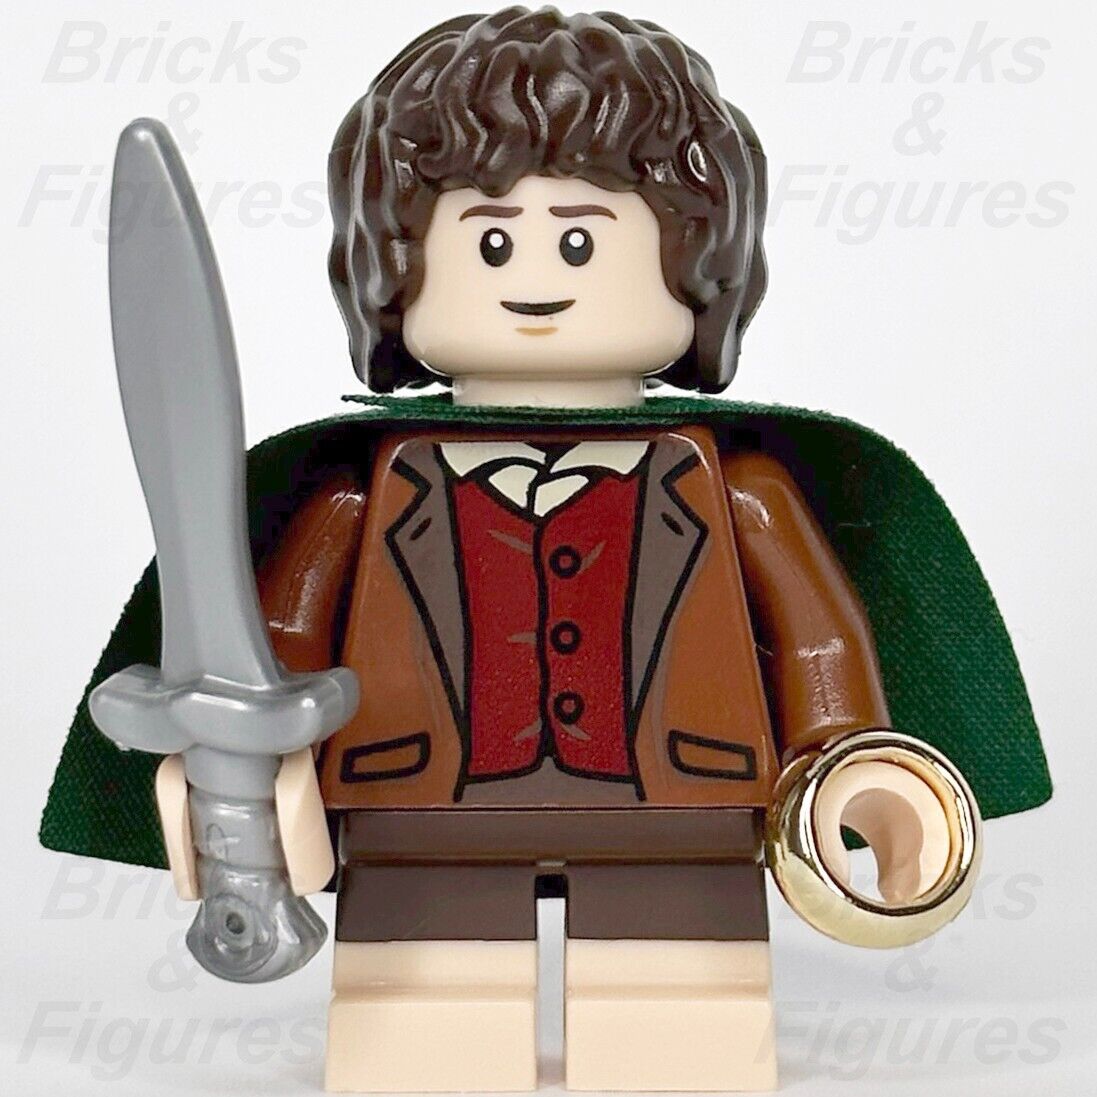 LEGO Frodo Baggins Minifigure The Hobbit & The Lord of the Rings 10316 lor112 - Bricks & Figures